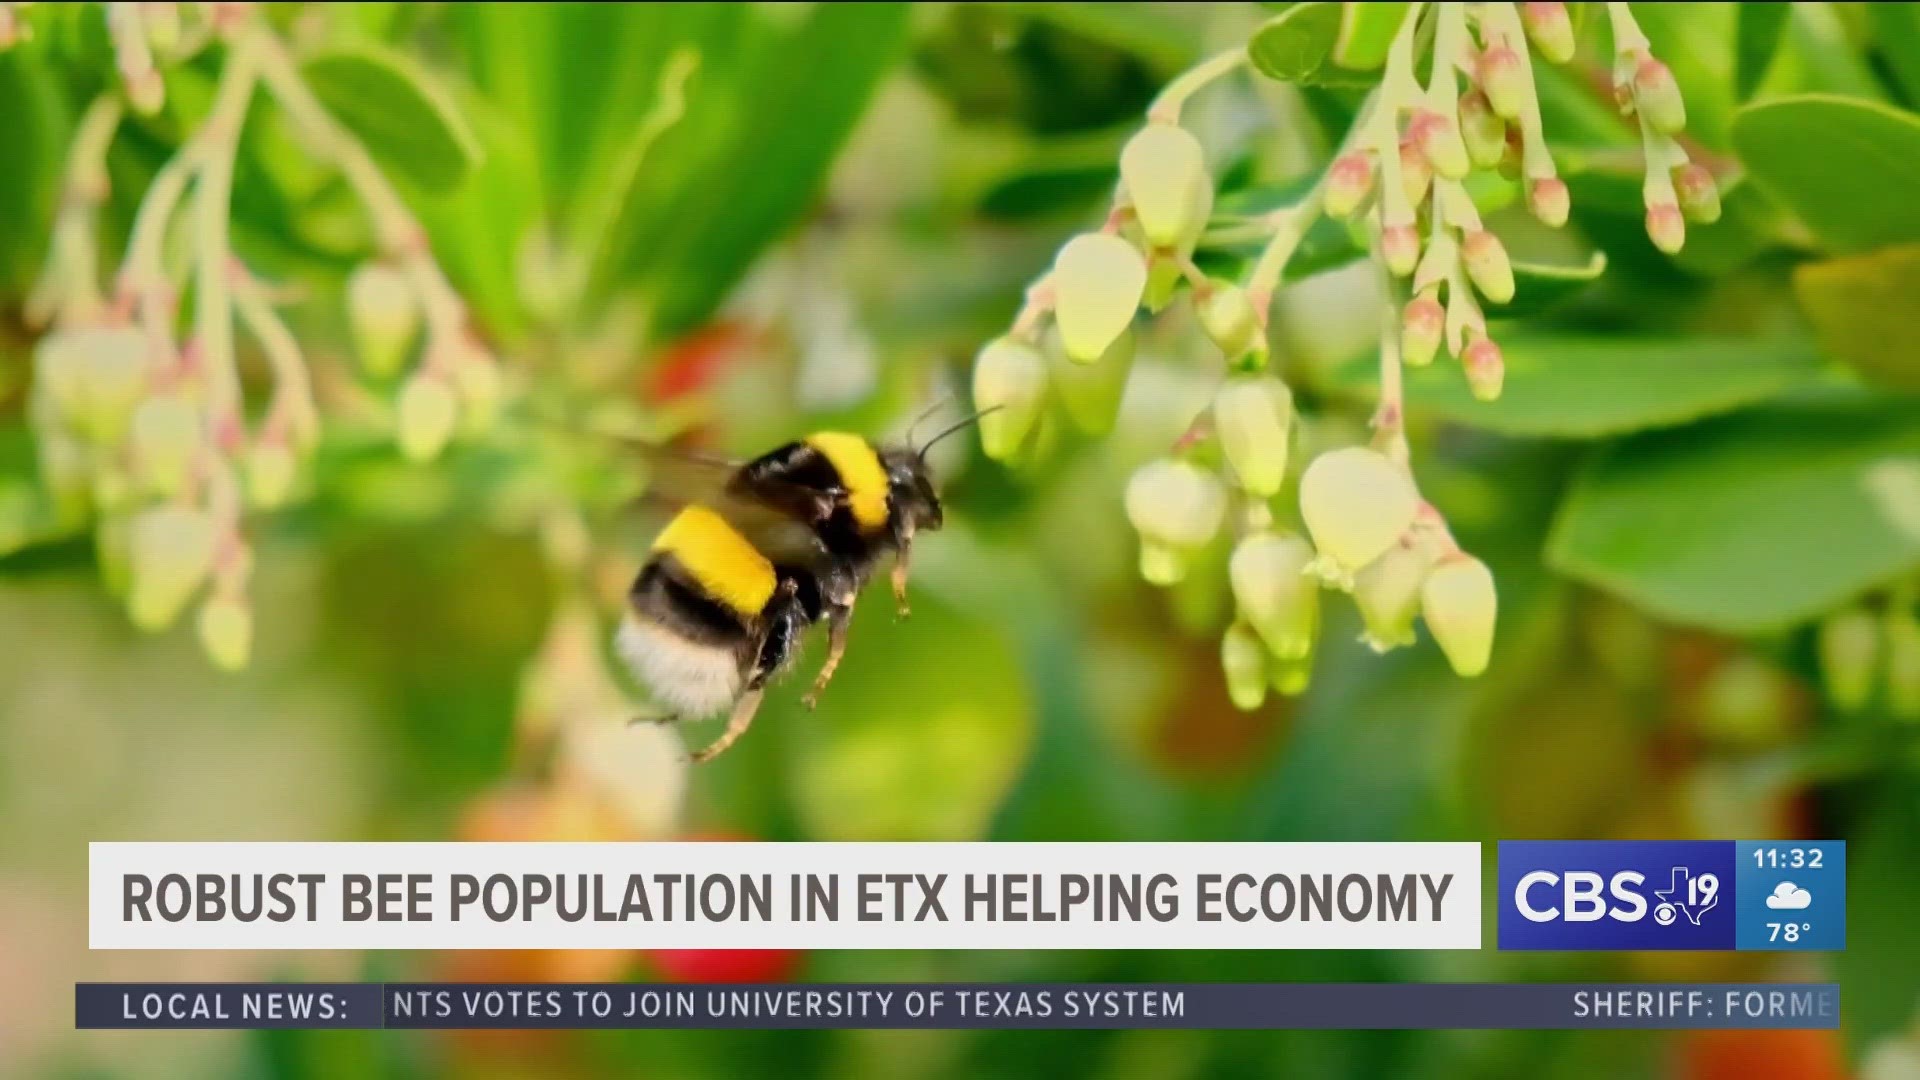 Local bees are helping local economy cbs19.tv